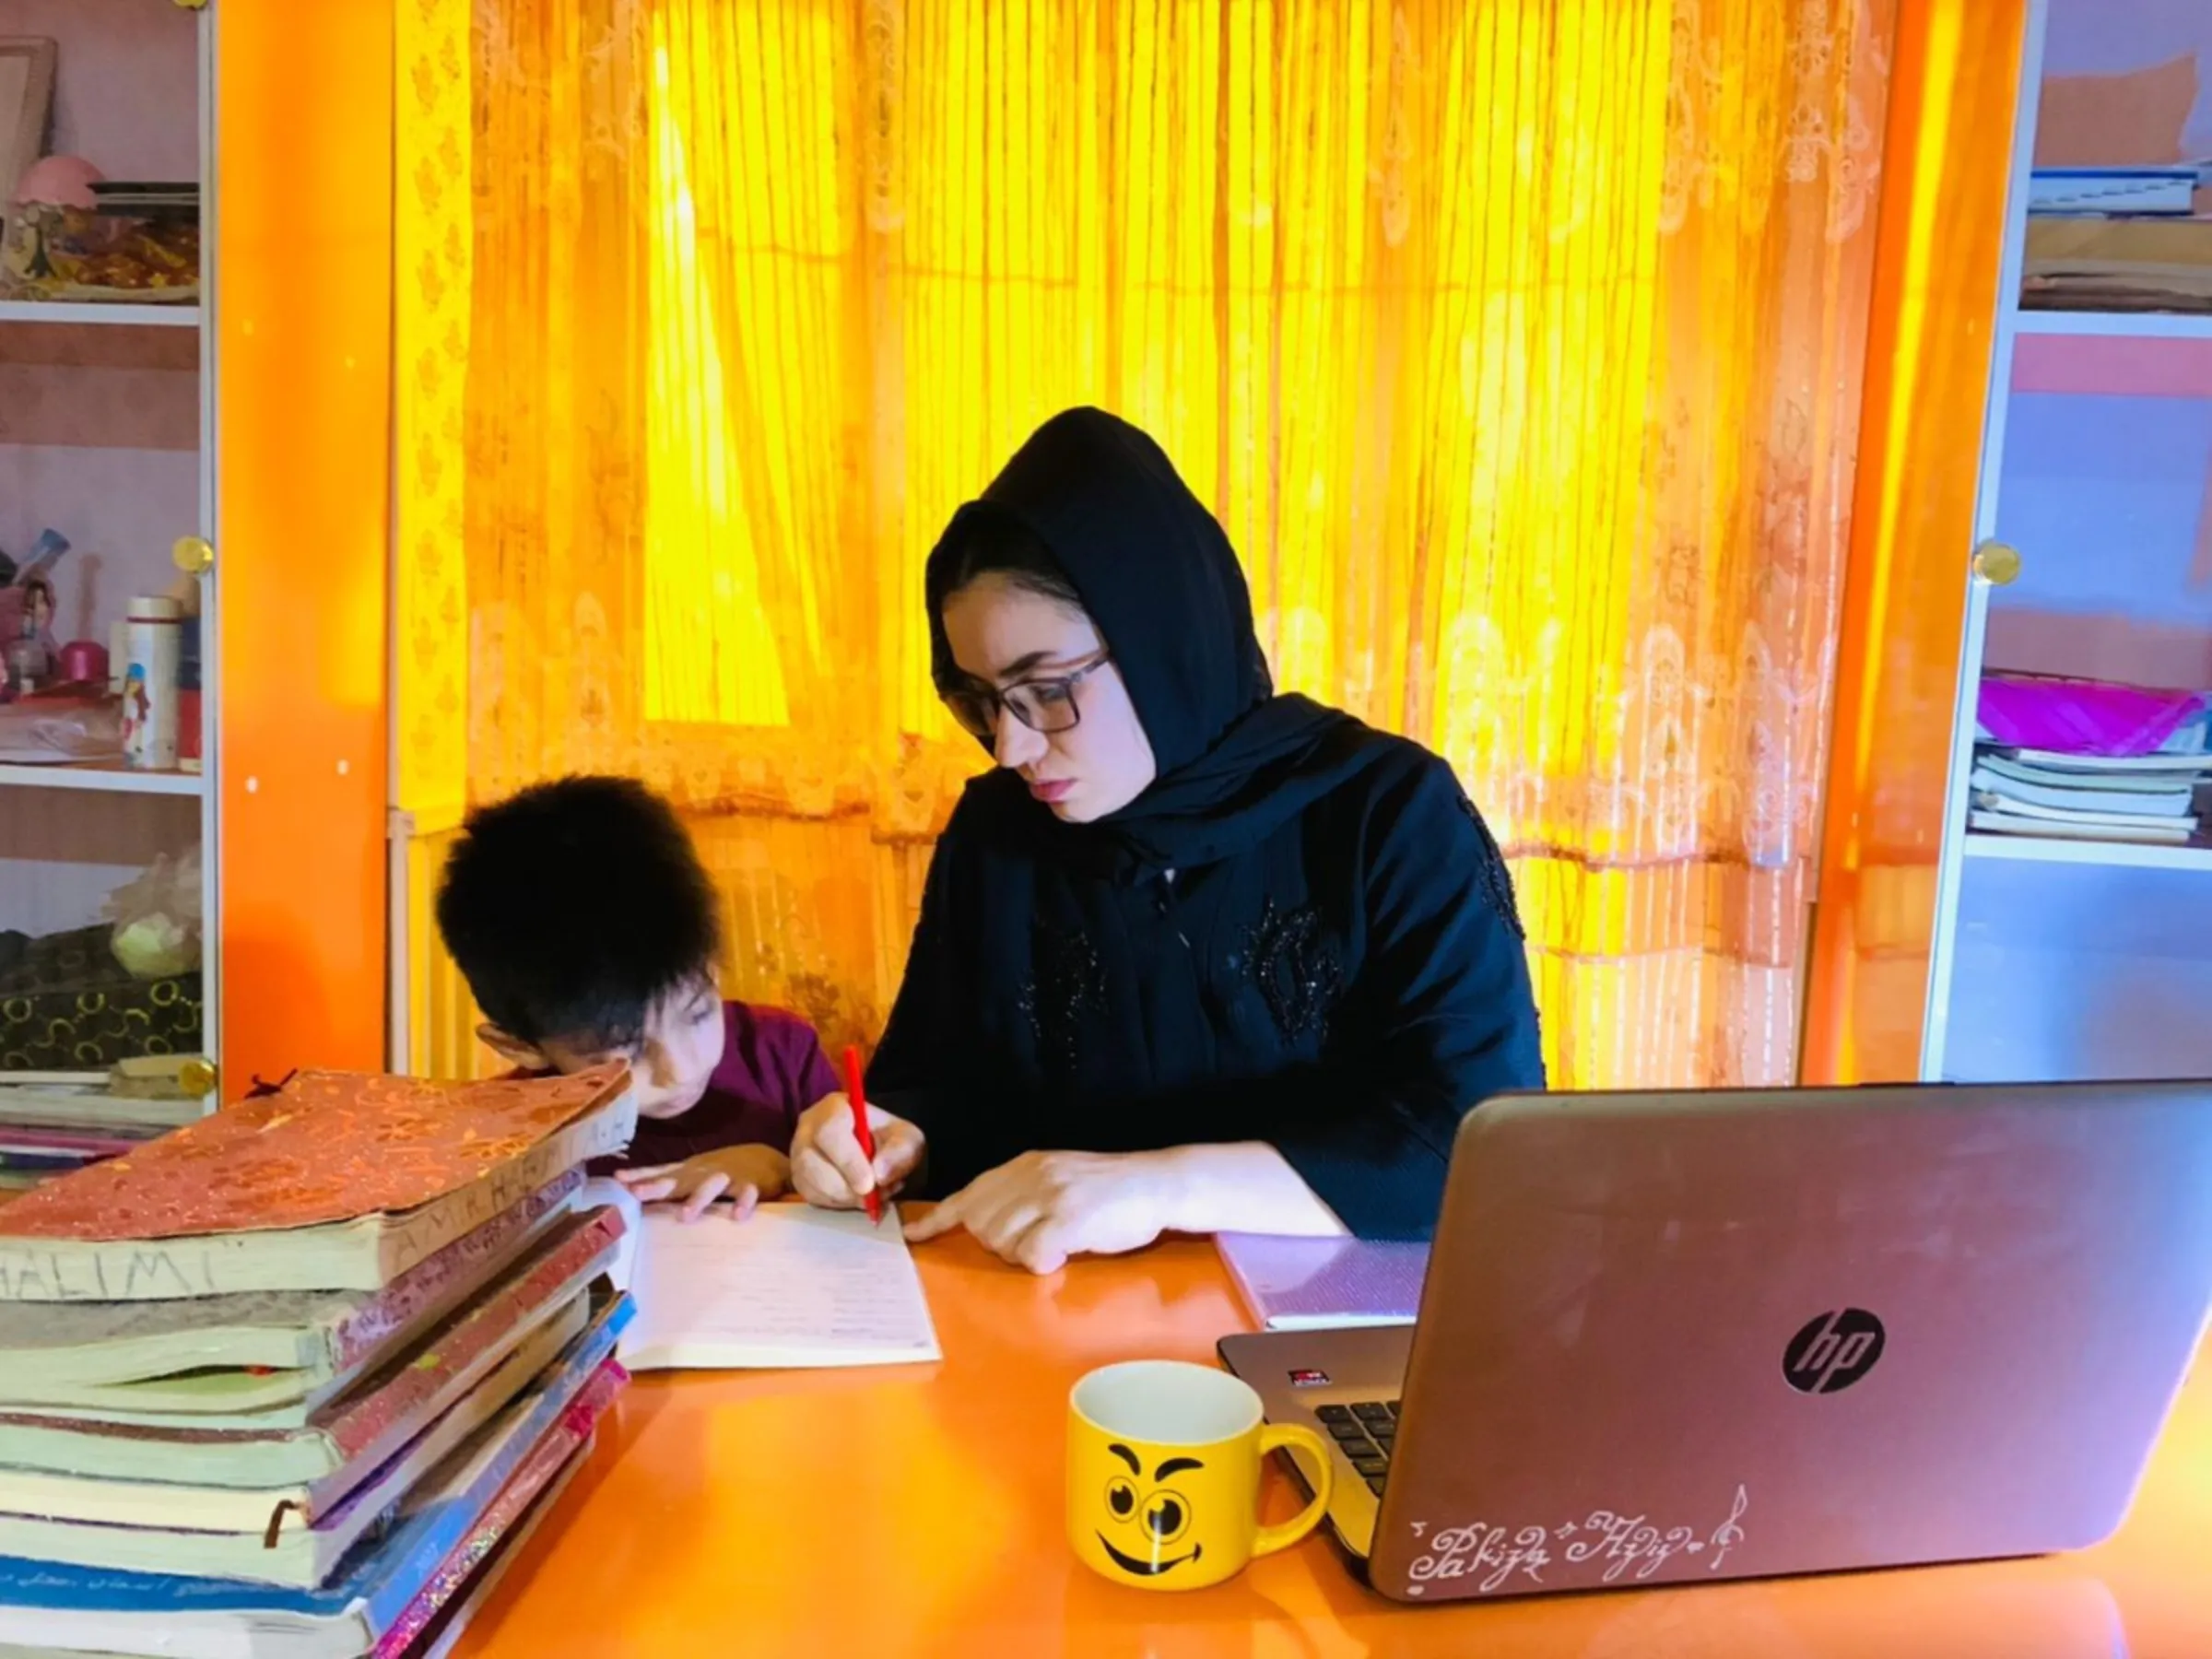 Former aid worker Nilab Azizi tends to her son while preparing for a nursing course in Mazar-i-Sharif, Afghanistan. Photo taken August 2023